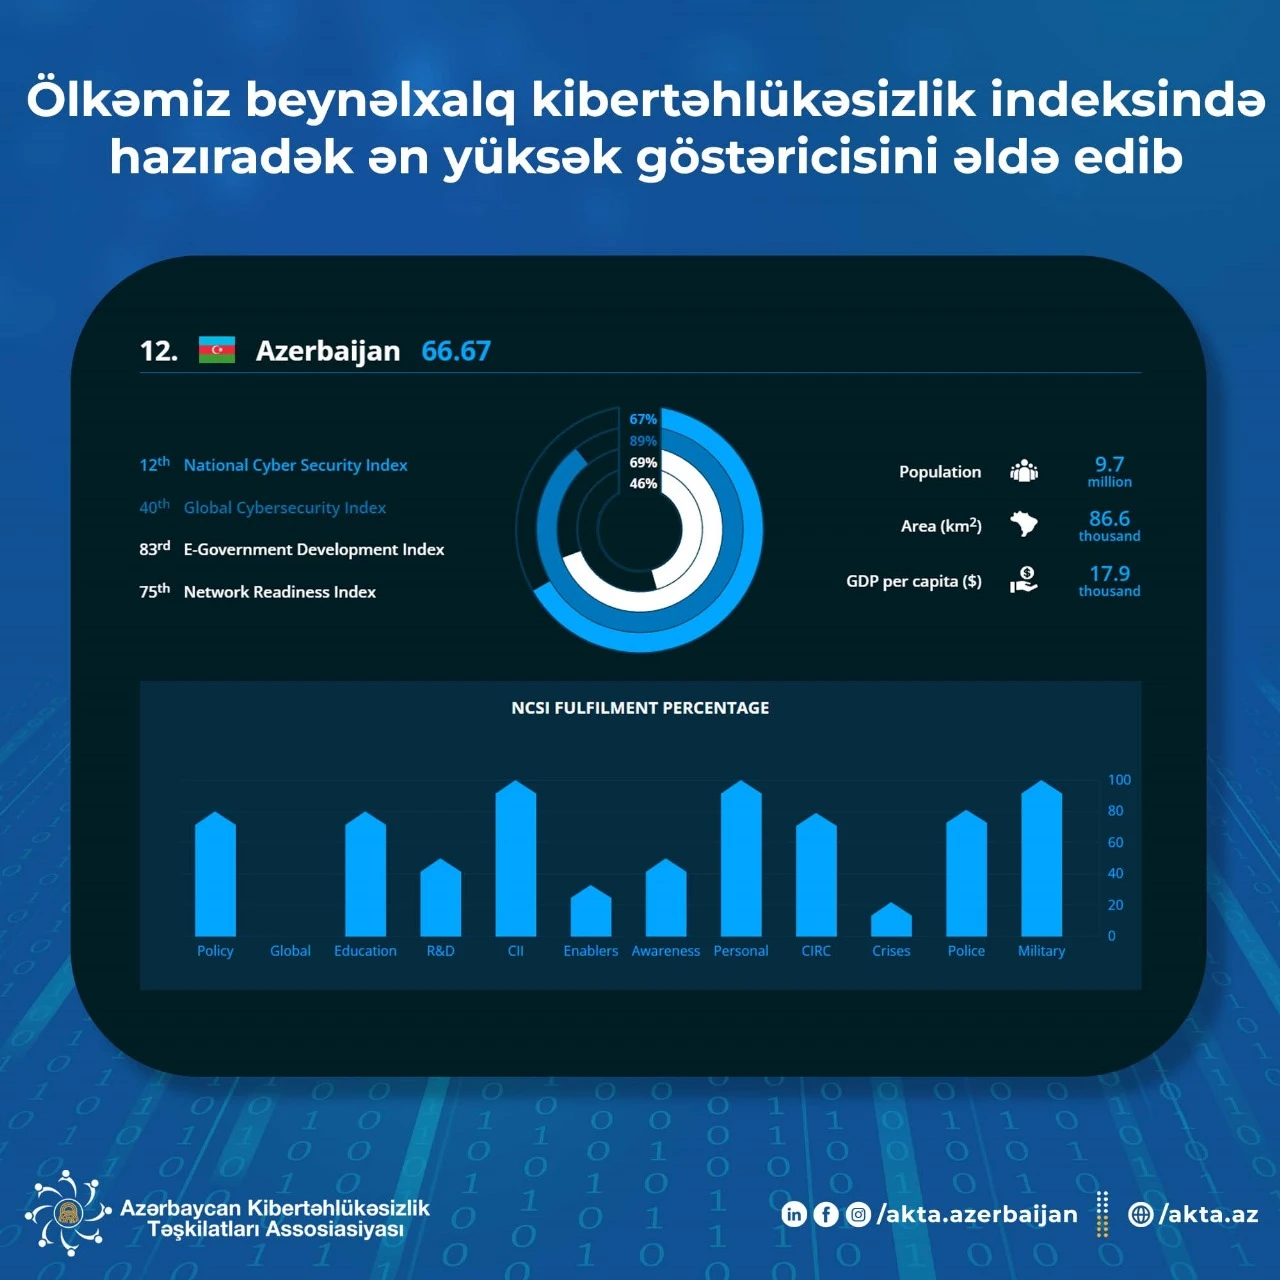 Azerbaijan has achieved the highest indicator in the Cybersecurity Index so far - 3